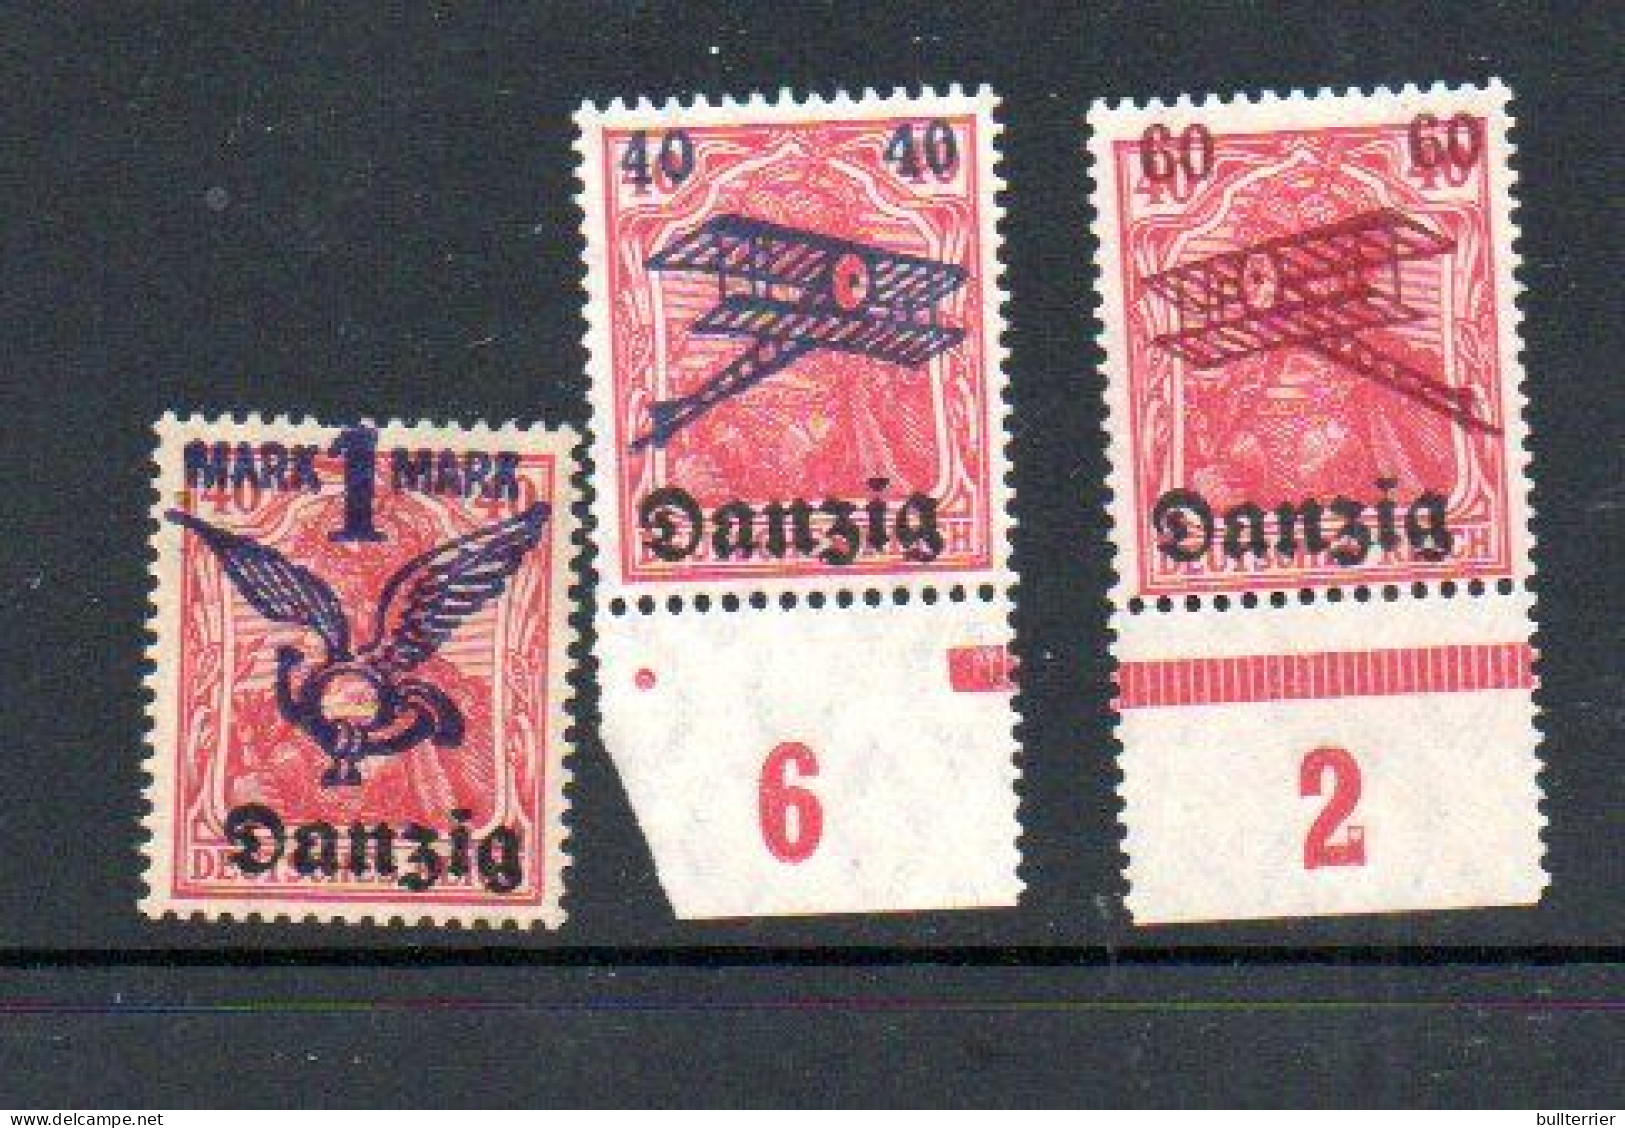 DANZIG - 1920 AIR SURCHARGES SET OF 3 MINT HINGED PREVIOUSLY - Andere-Europa